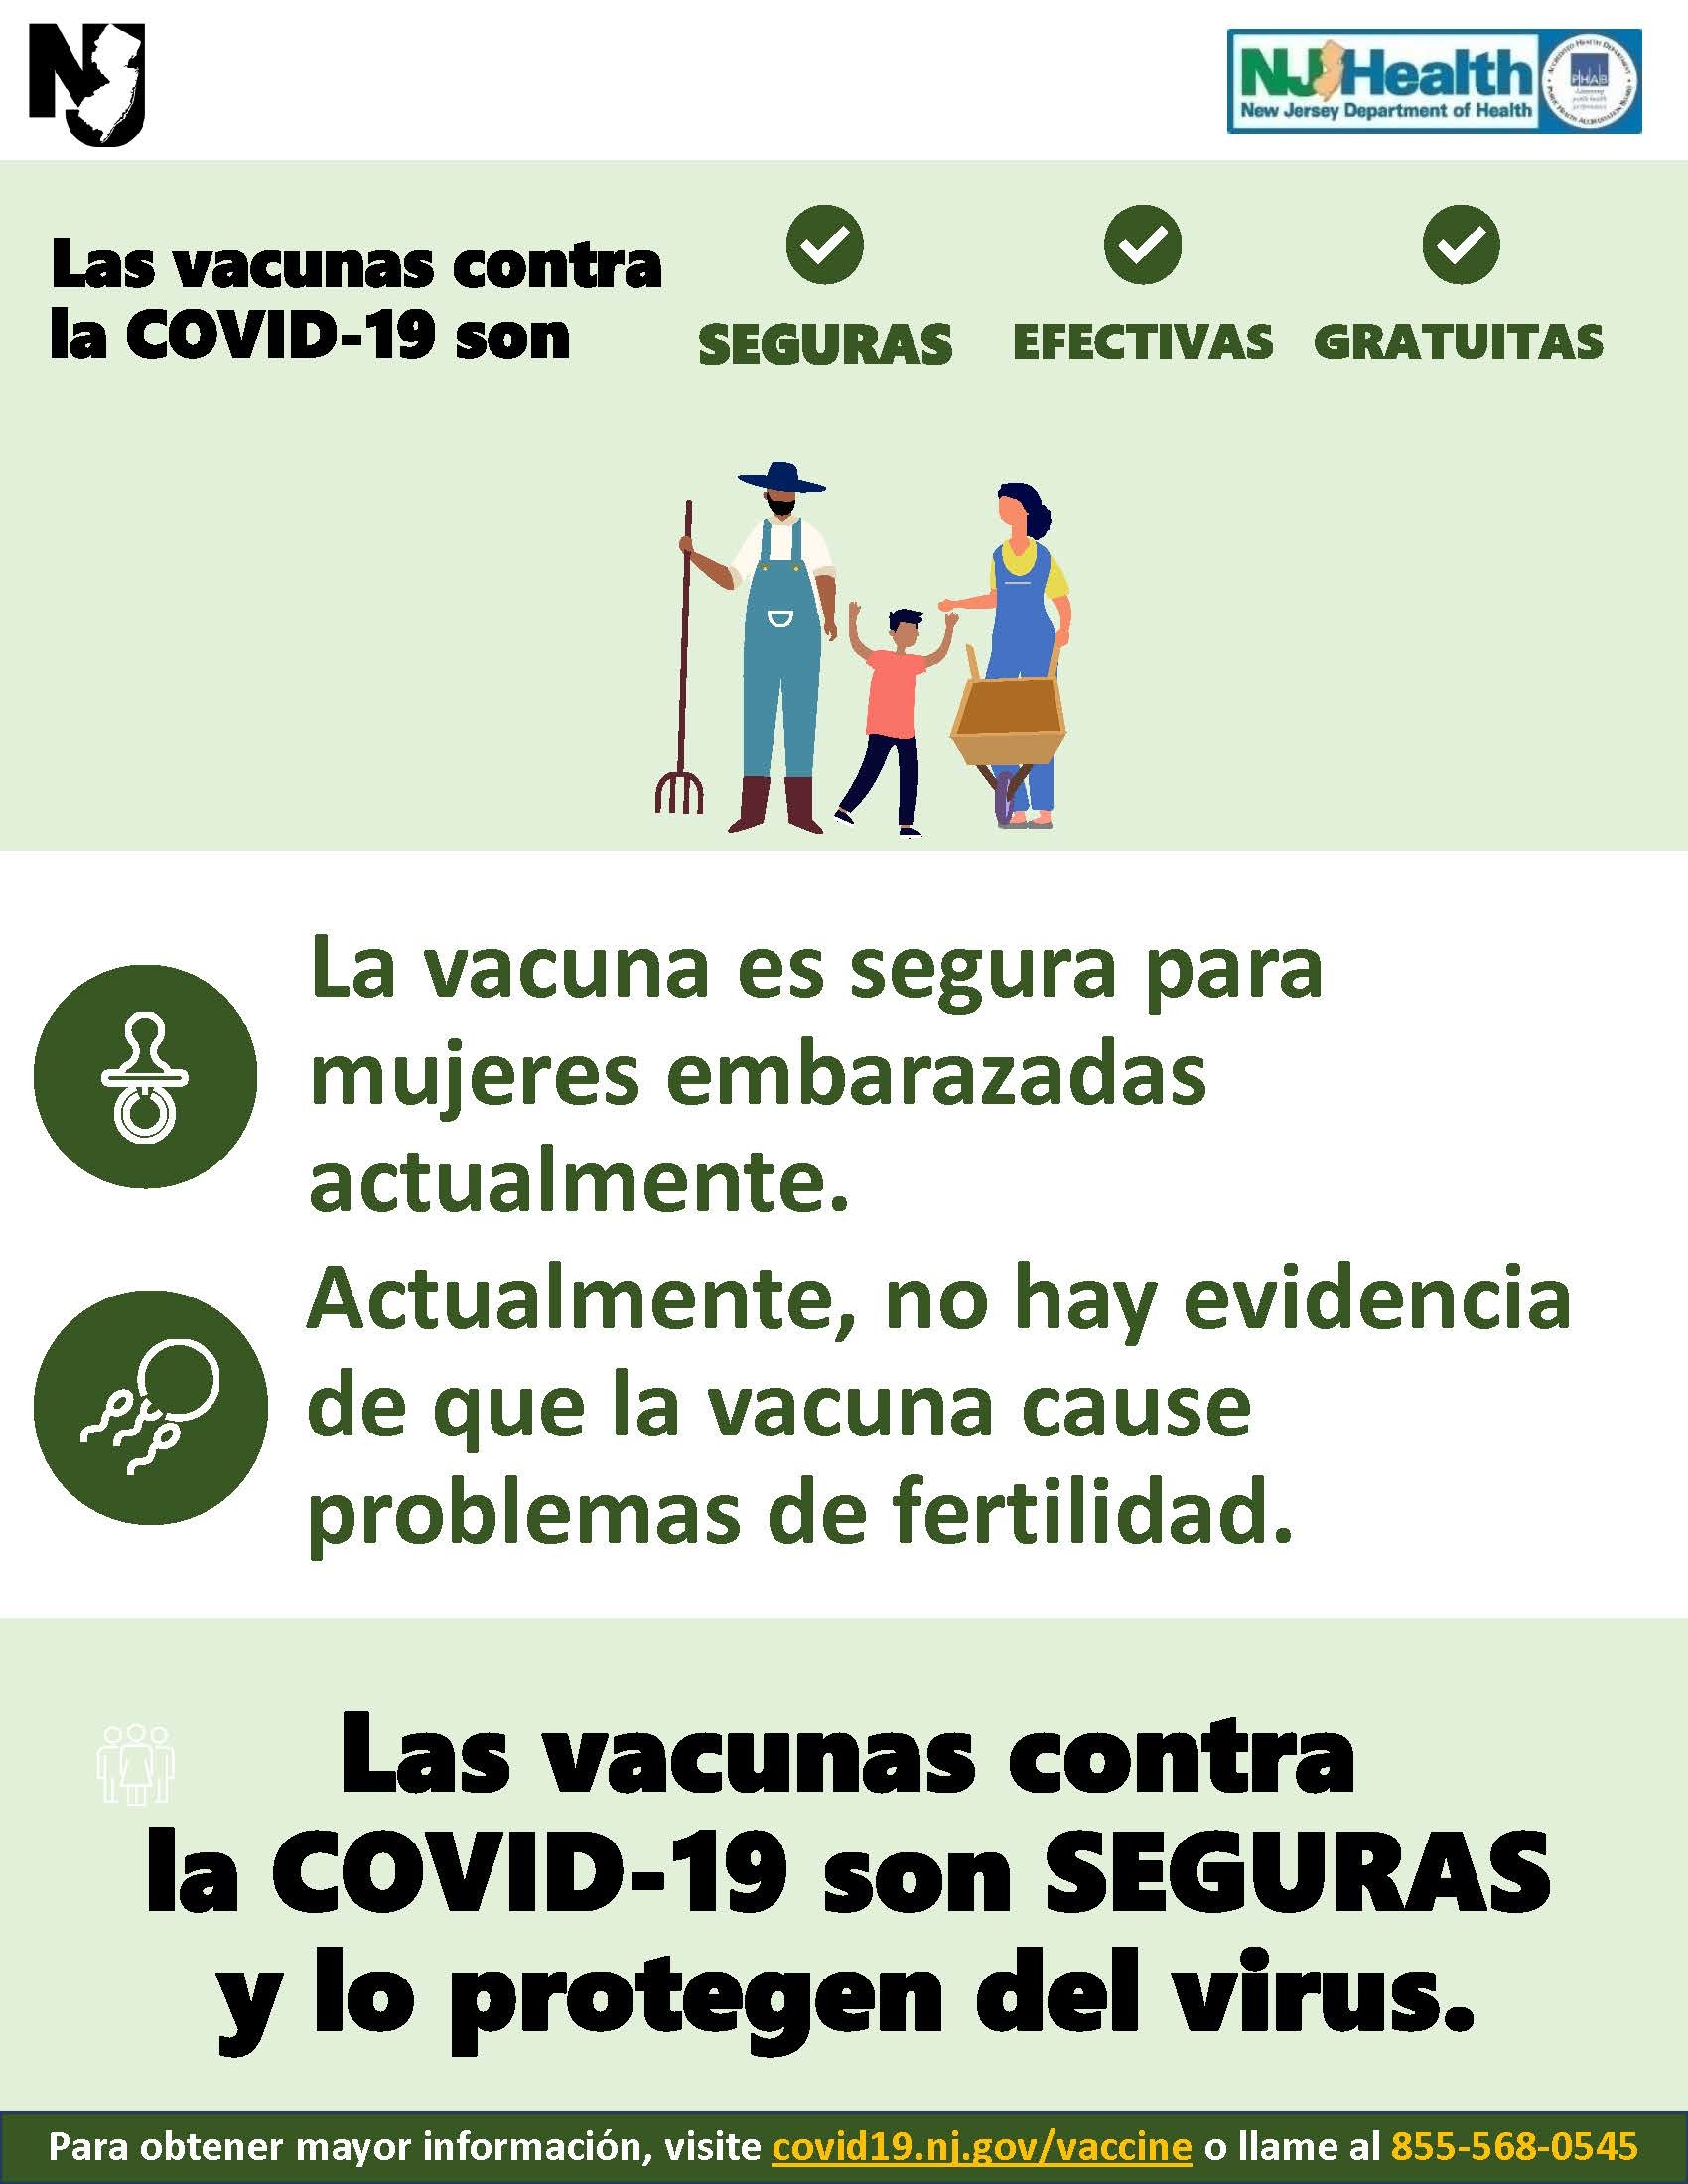 COVID-19 Vaccine During Pregnancy flyer (Spanish)